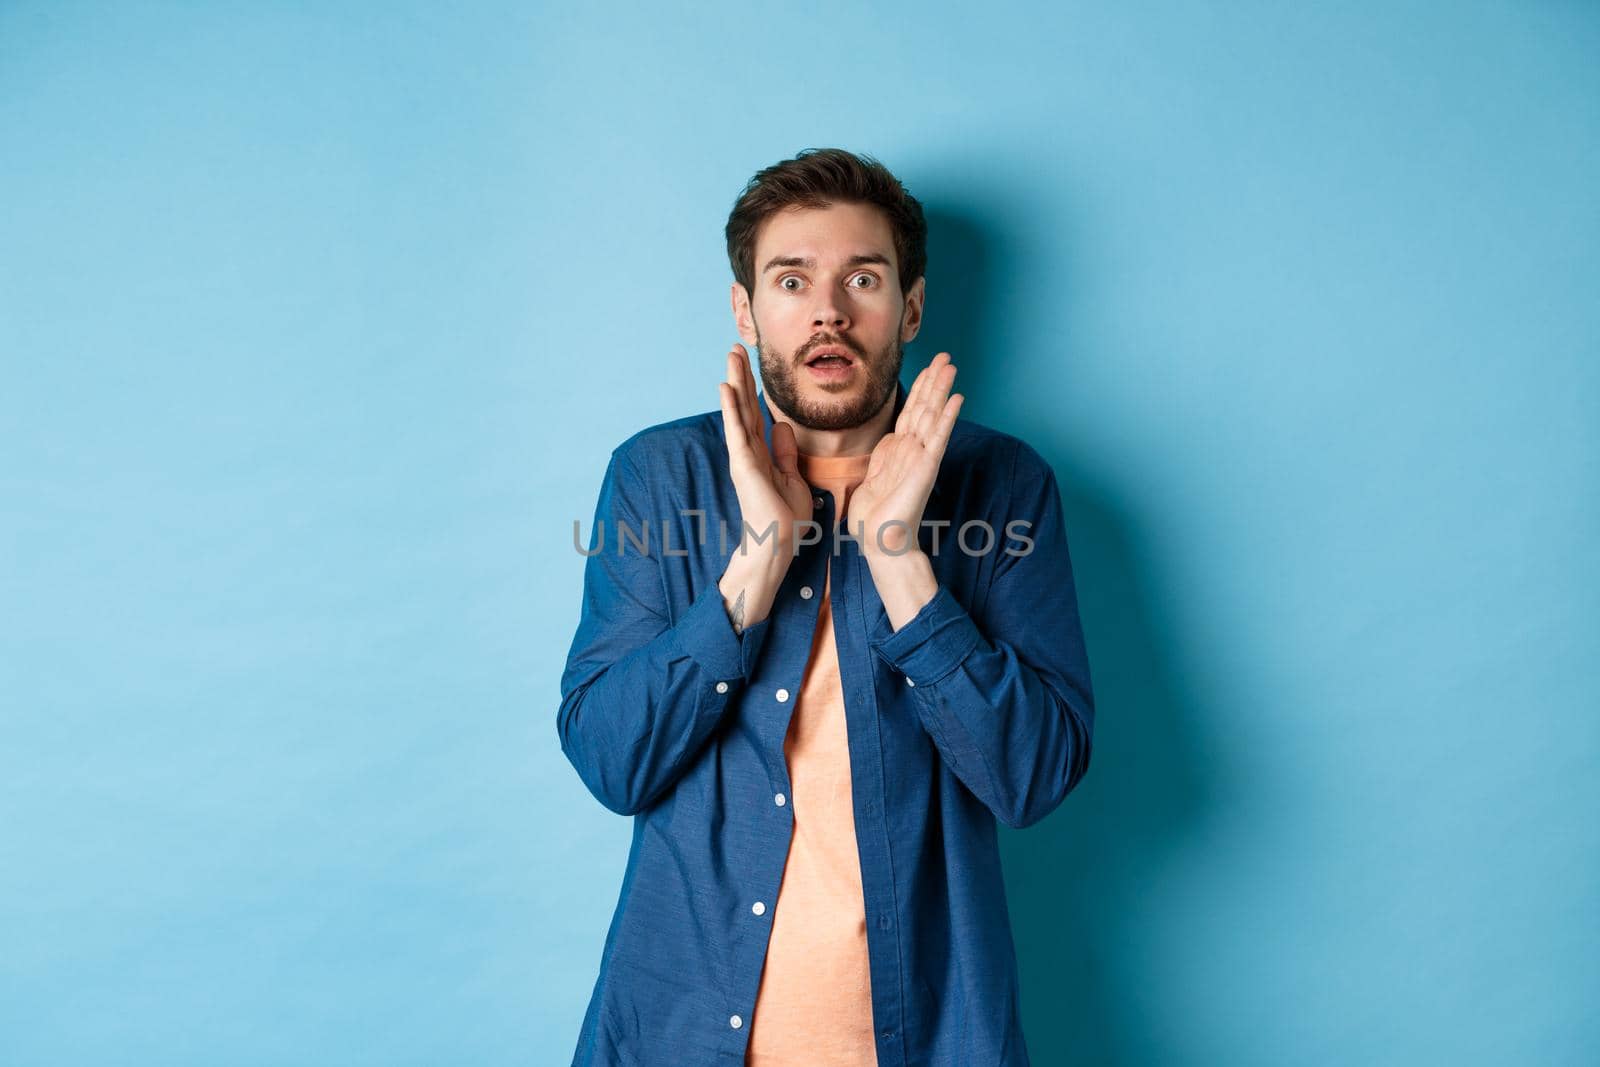 Shocked and scared young man standing in stupor, raising hands up and gasping speechless, standing on blue background.